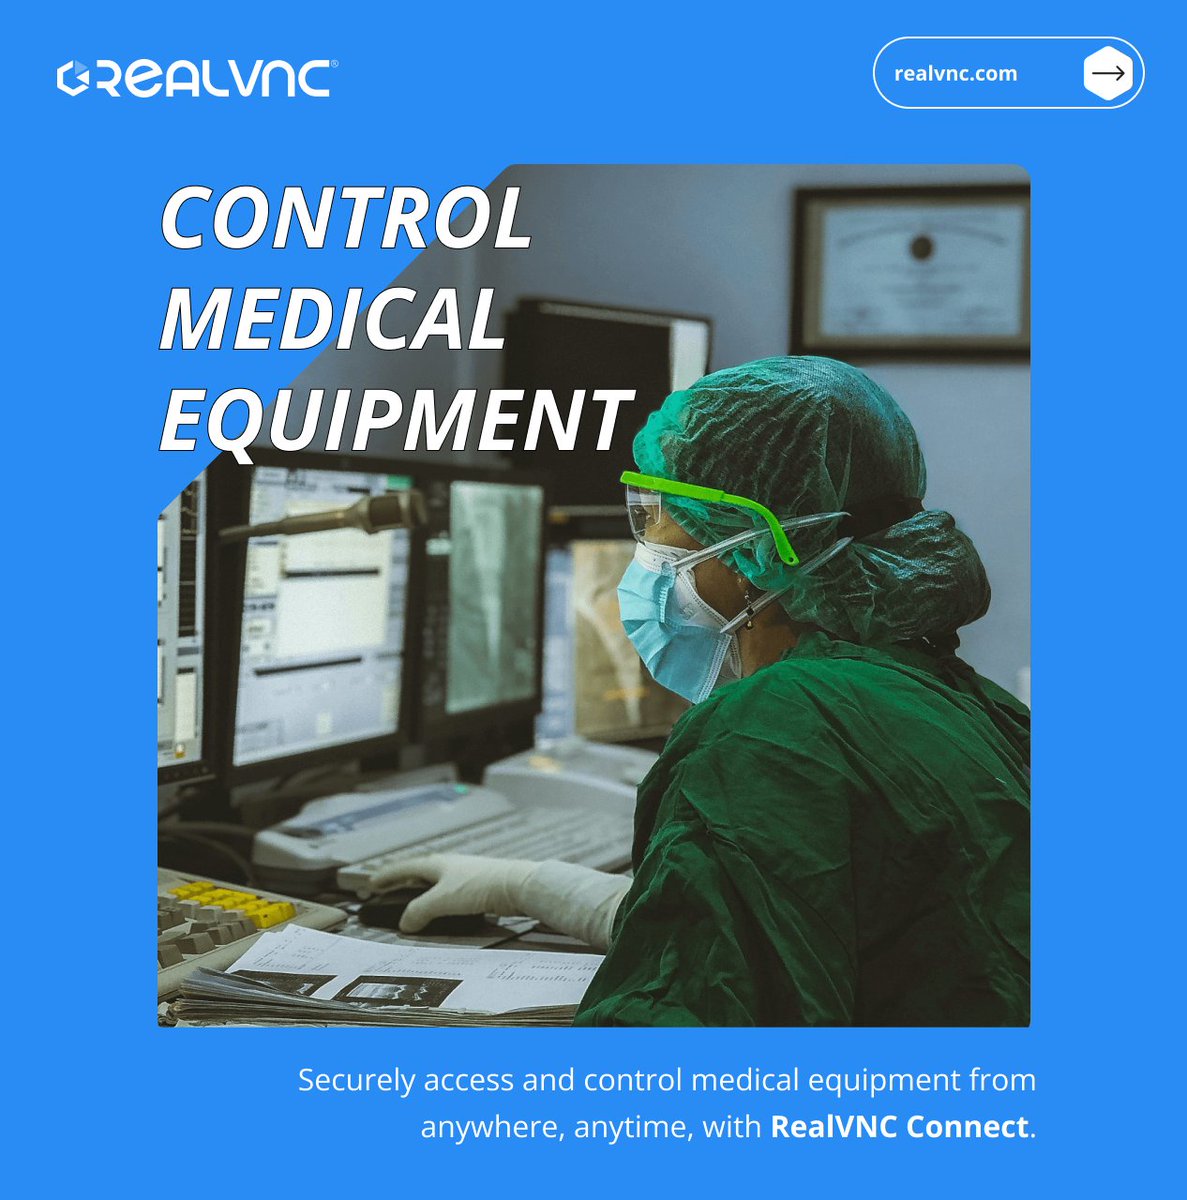 Boost healthcare services delivery with RealVNC Connect. Securely access and control medical equipment from anywhere, anytime. 

#HealthTech #RemoteAccess